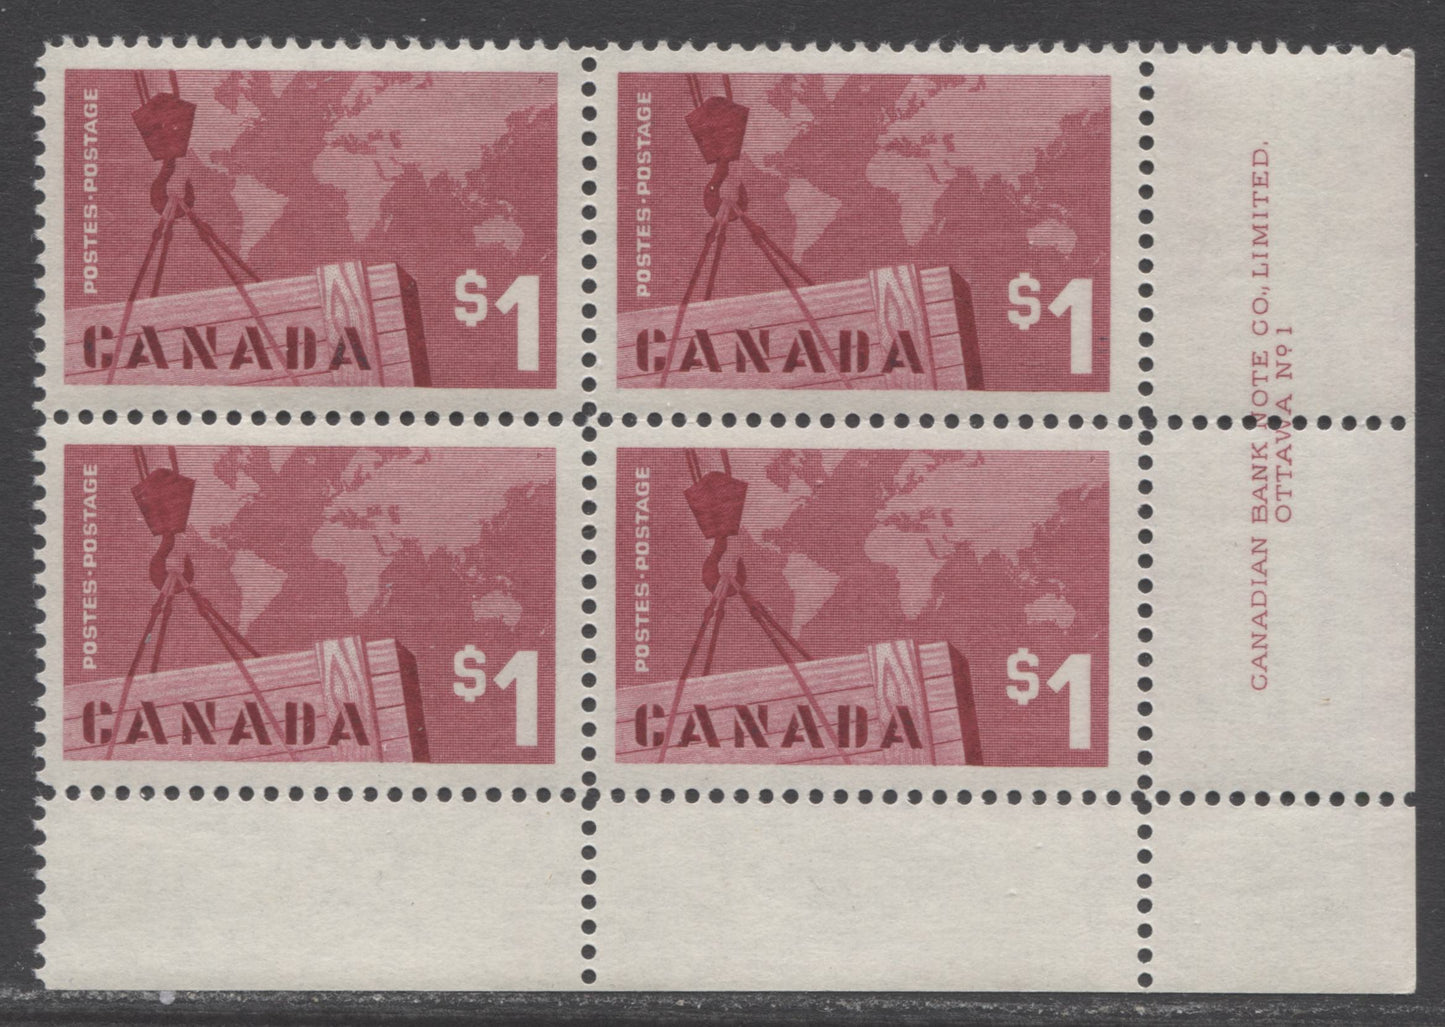 Lot 153 Canada #411 $1 Carmine Lake Crane & Map, 1963 Canadian Exports Issue, A VFNH LR Plate 1 Block Of 4 On Smooth Paper With Streaky Satin Gum